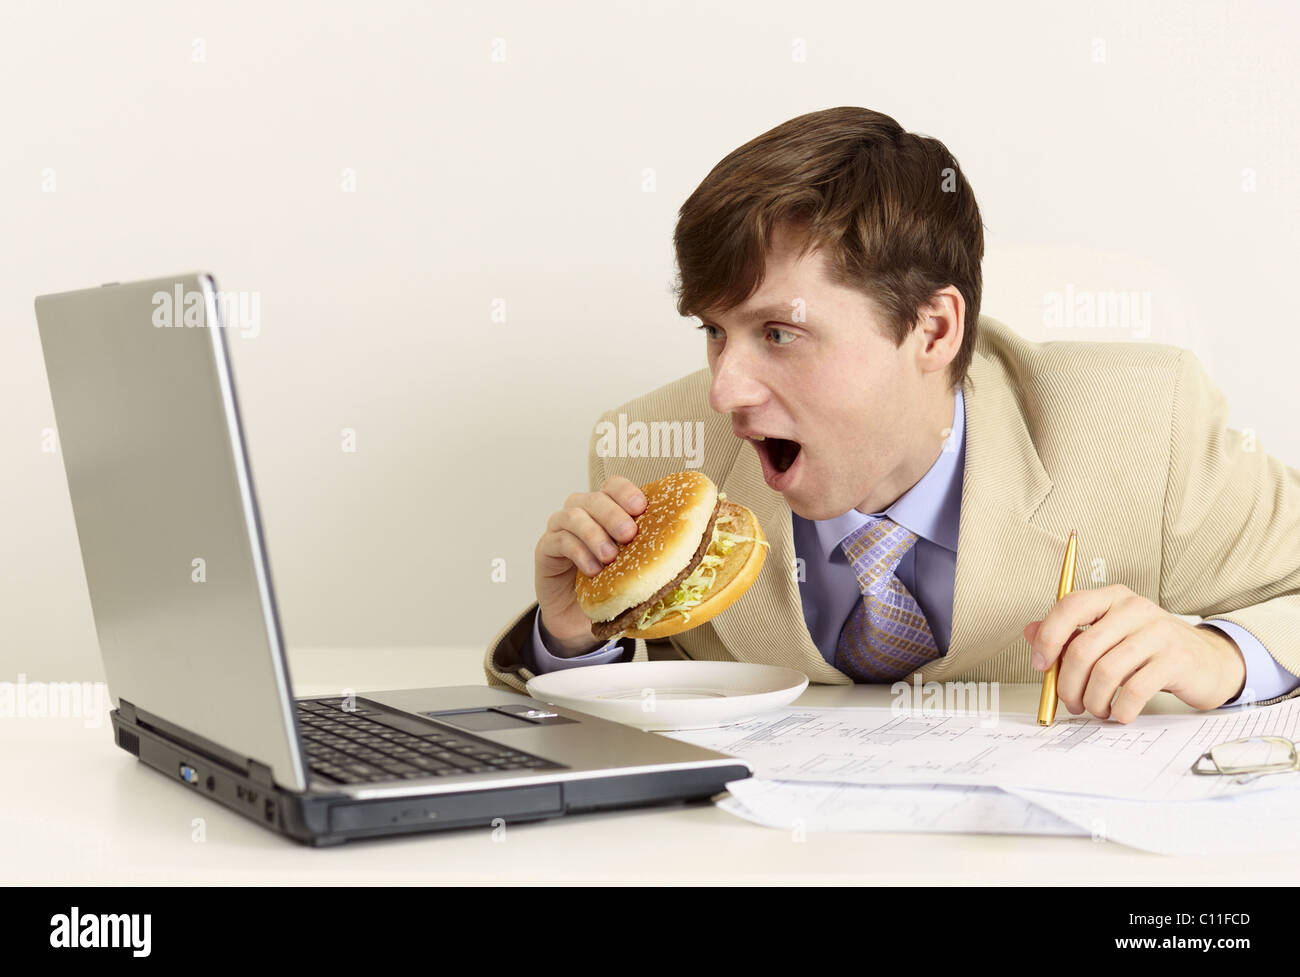 Young businessman is going to eat sandwich Stock Photo